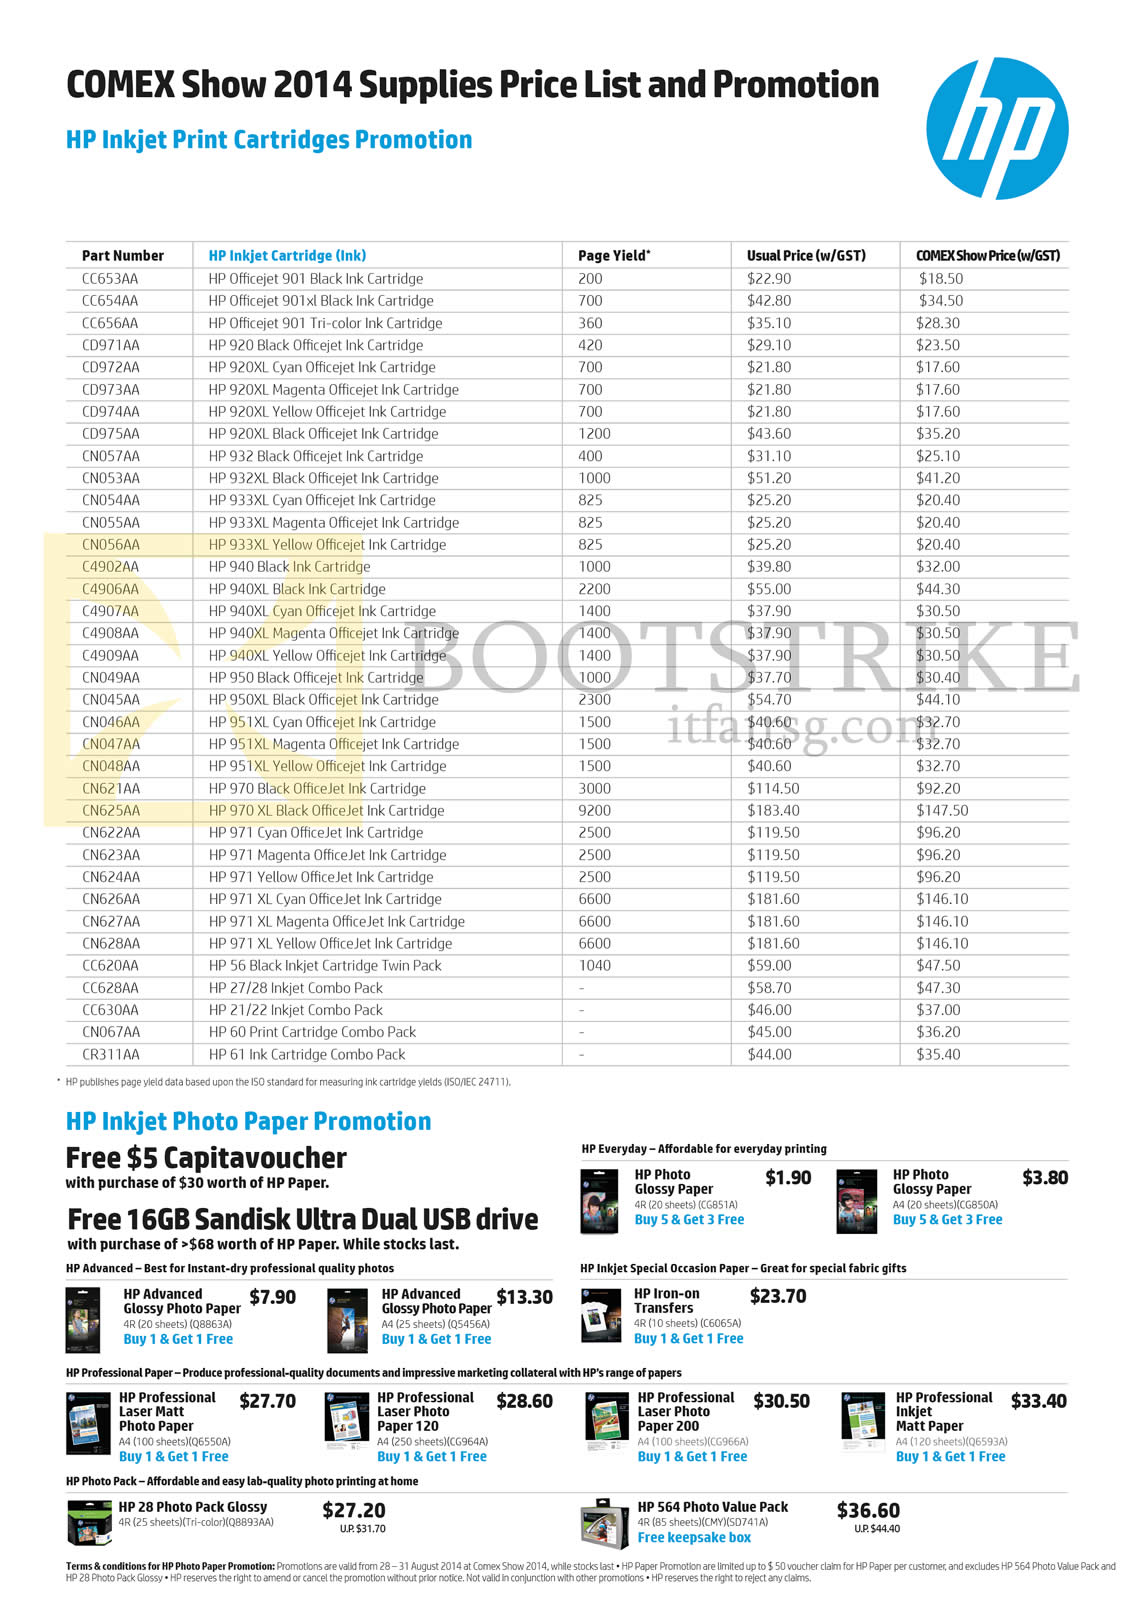 COMEX 2014 price list image brochure of HP Inkjet Print Cartridges, Photo Paper Everyday Advanced Professional Iron-on